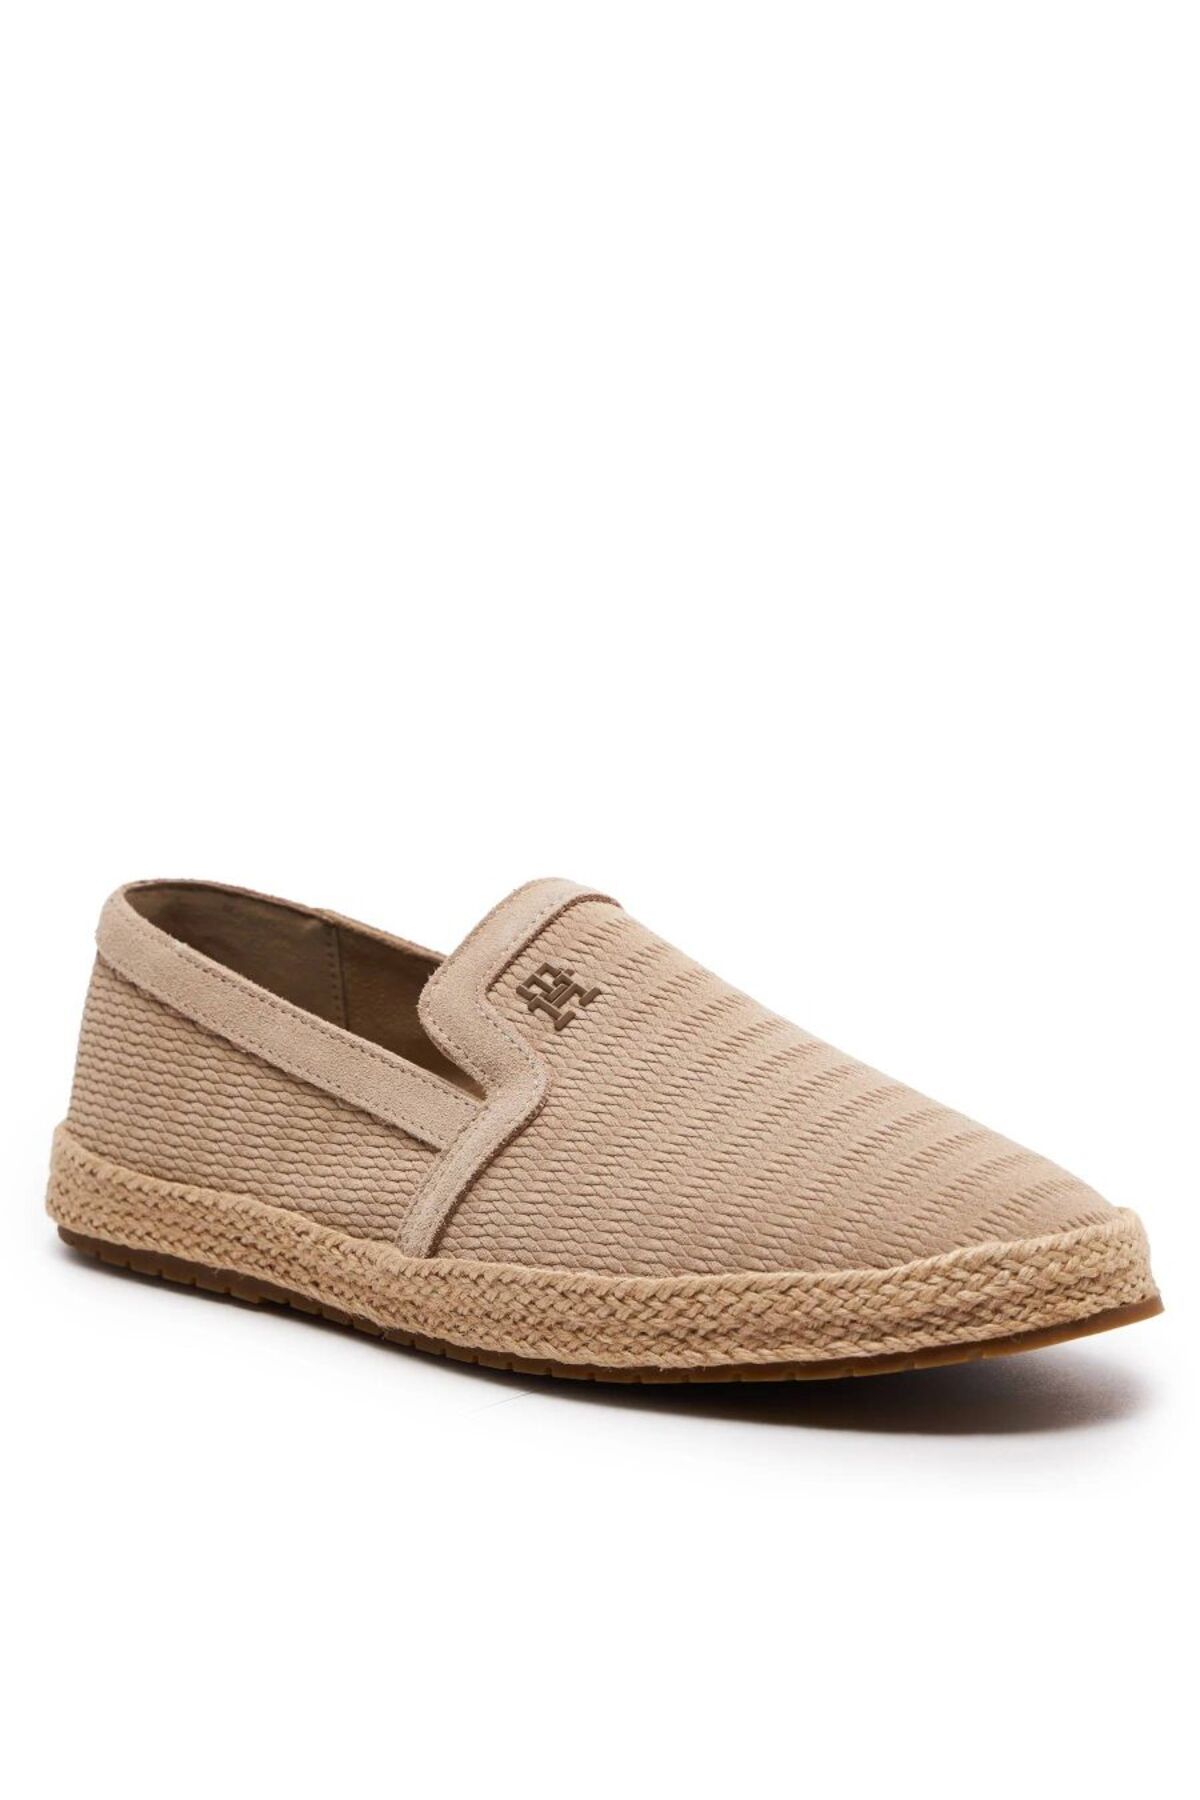 Tommy Hilfiger TH ESAPDRILLE CLASSIC SUEDE